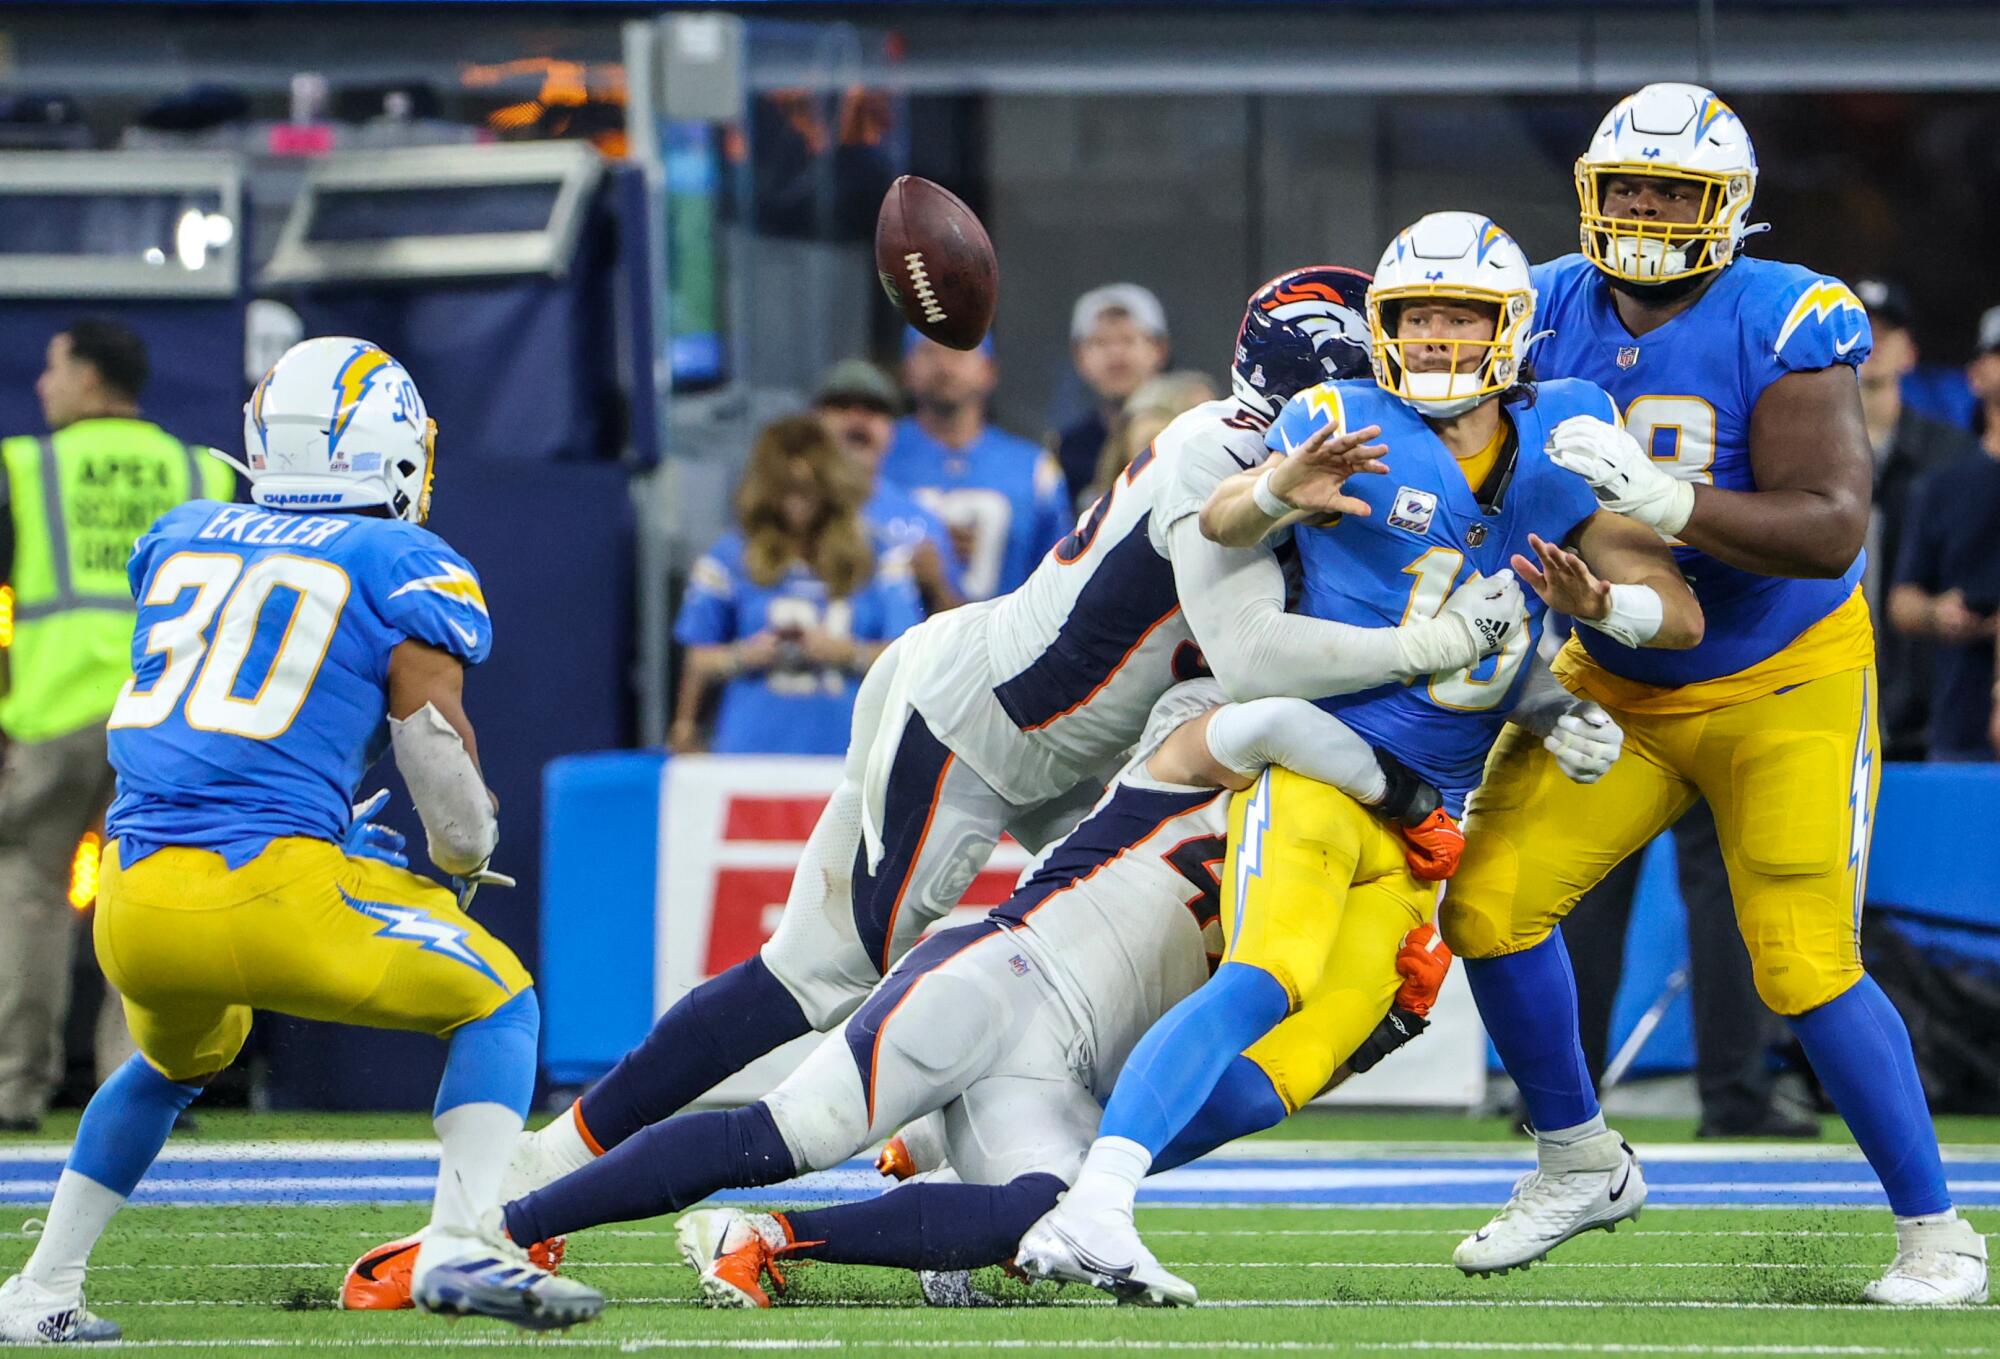 Chargers quarterback Justin Herbert flips a pass to running back Austin Ekeler just before being sacked.